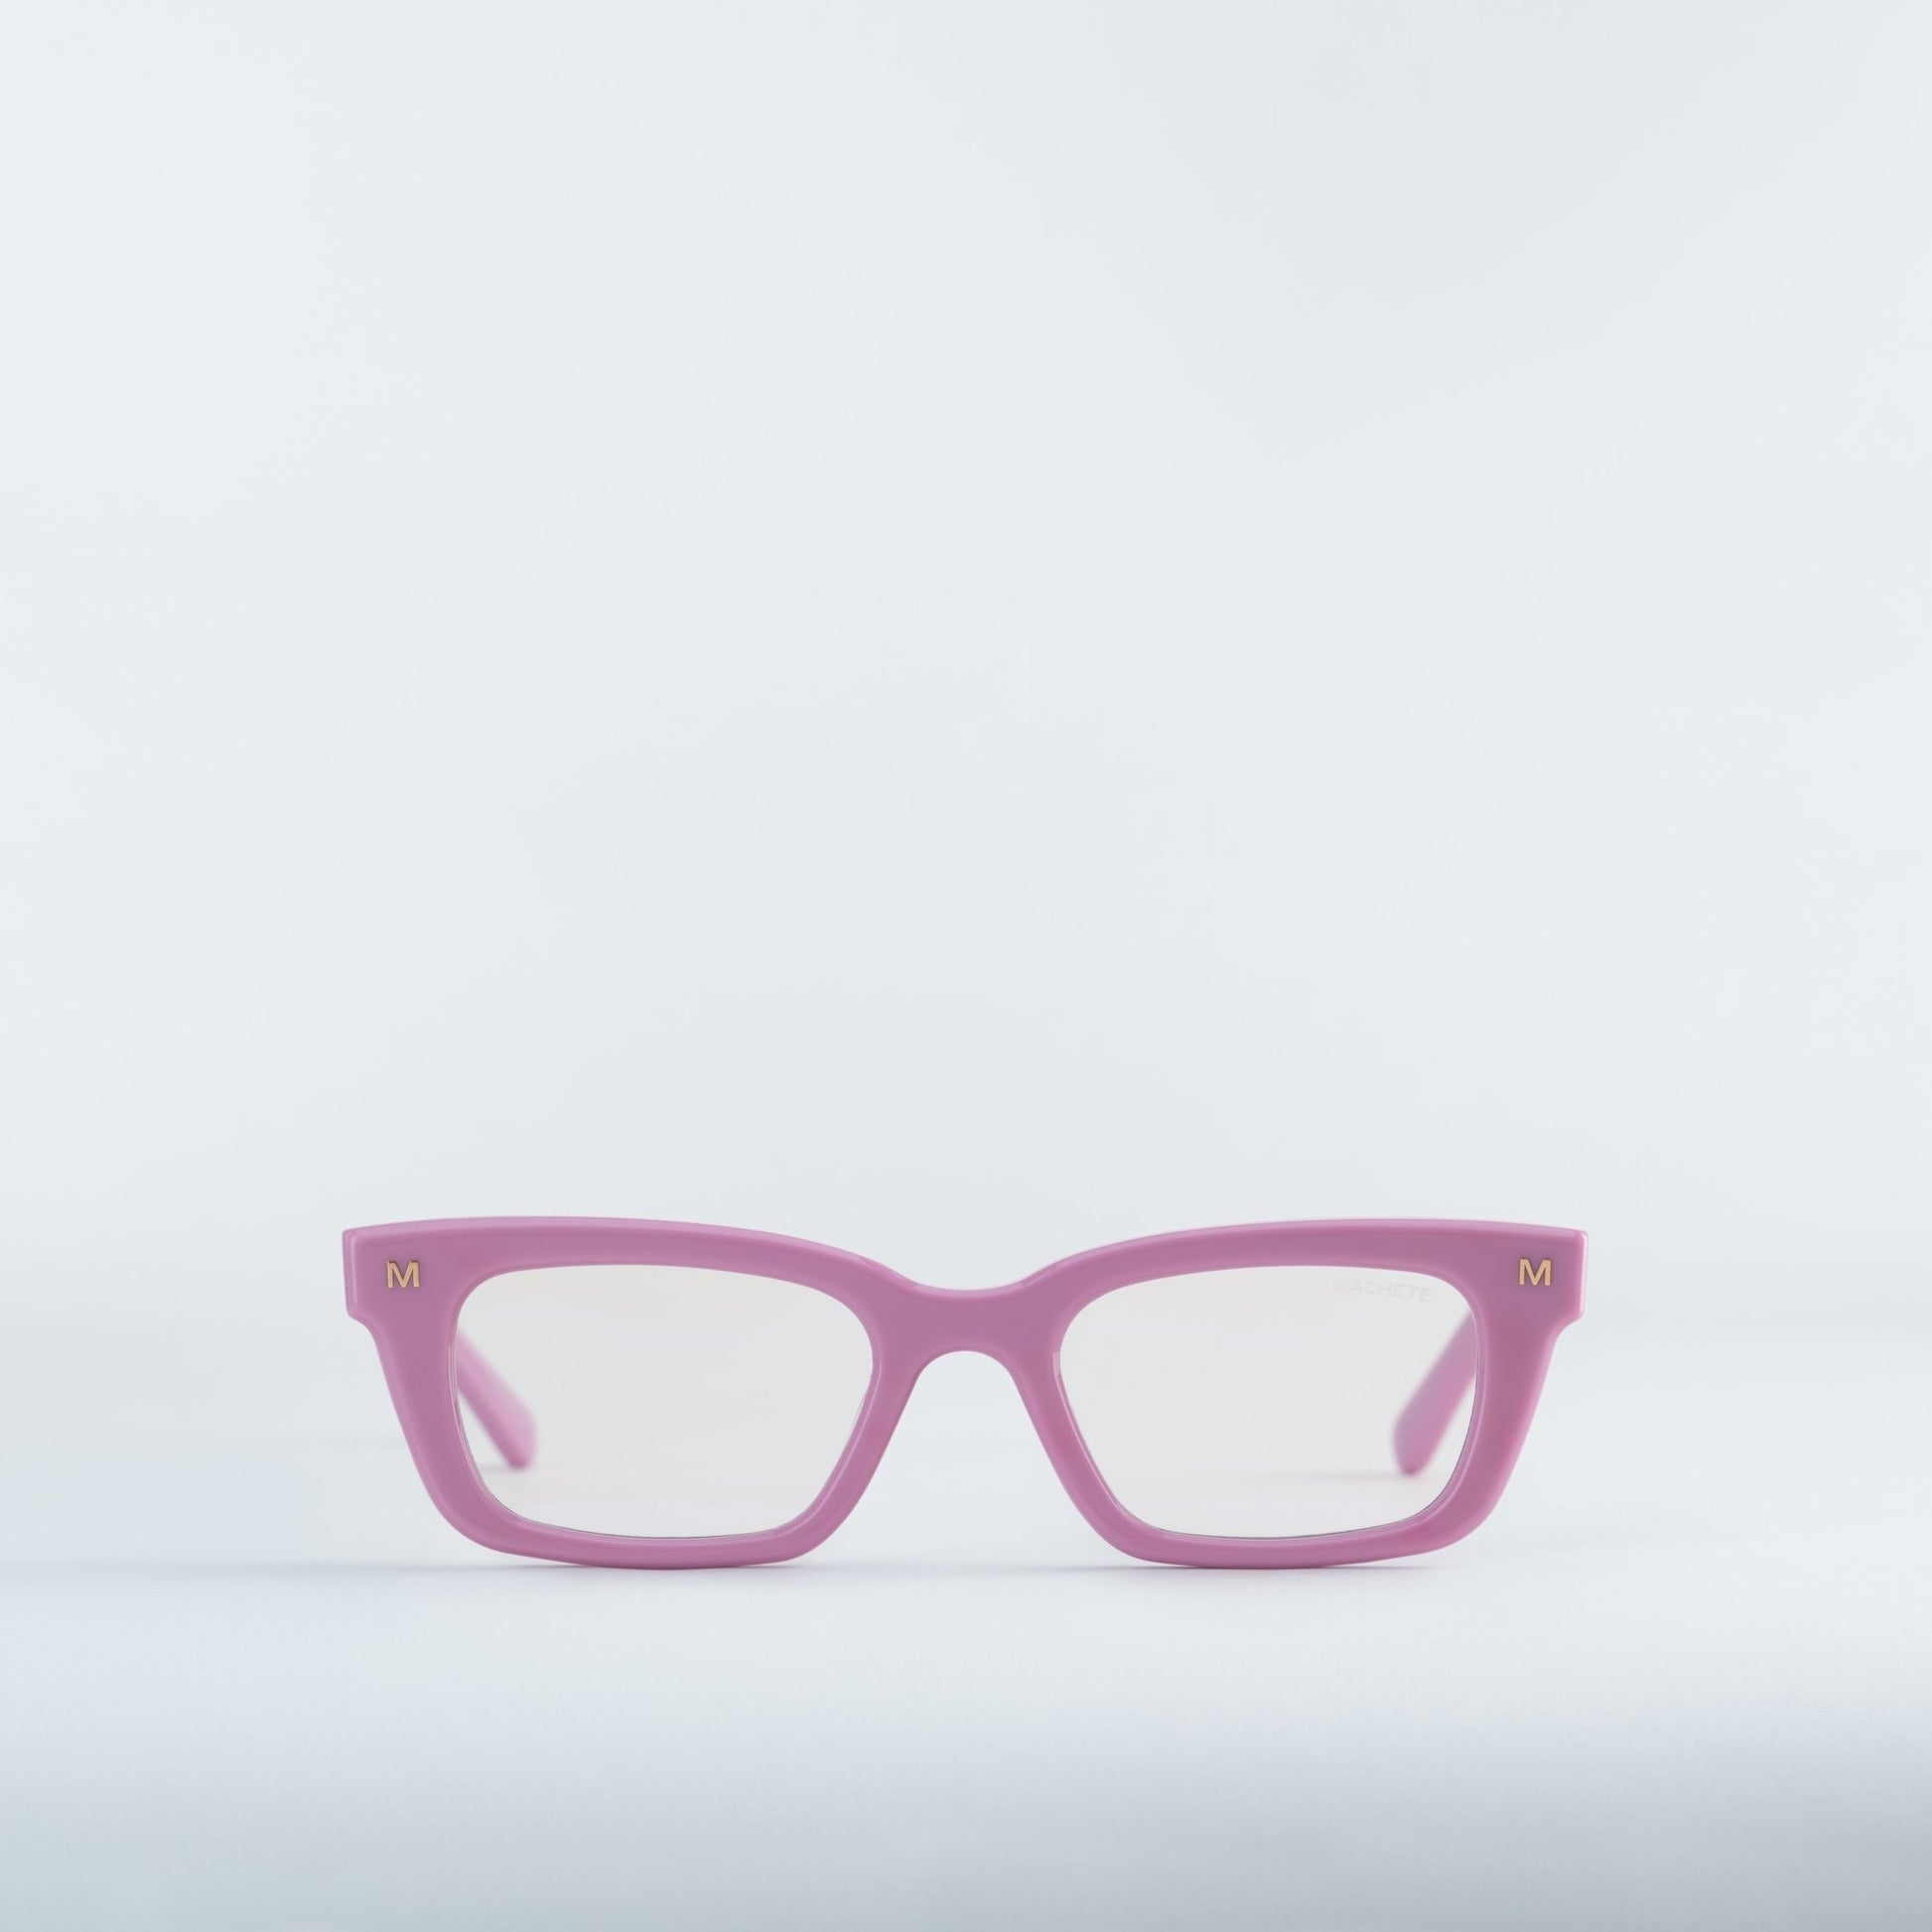 Ruby Blue Light Filtering Glasses in Orchid